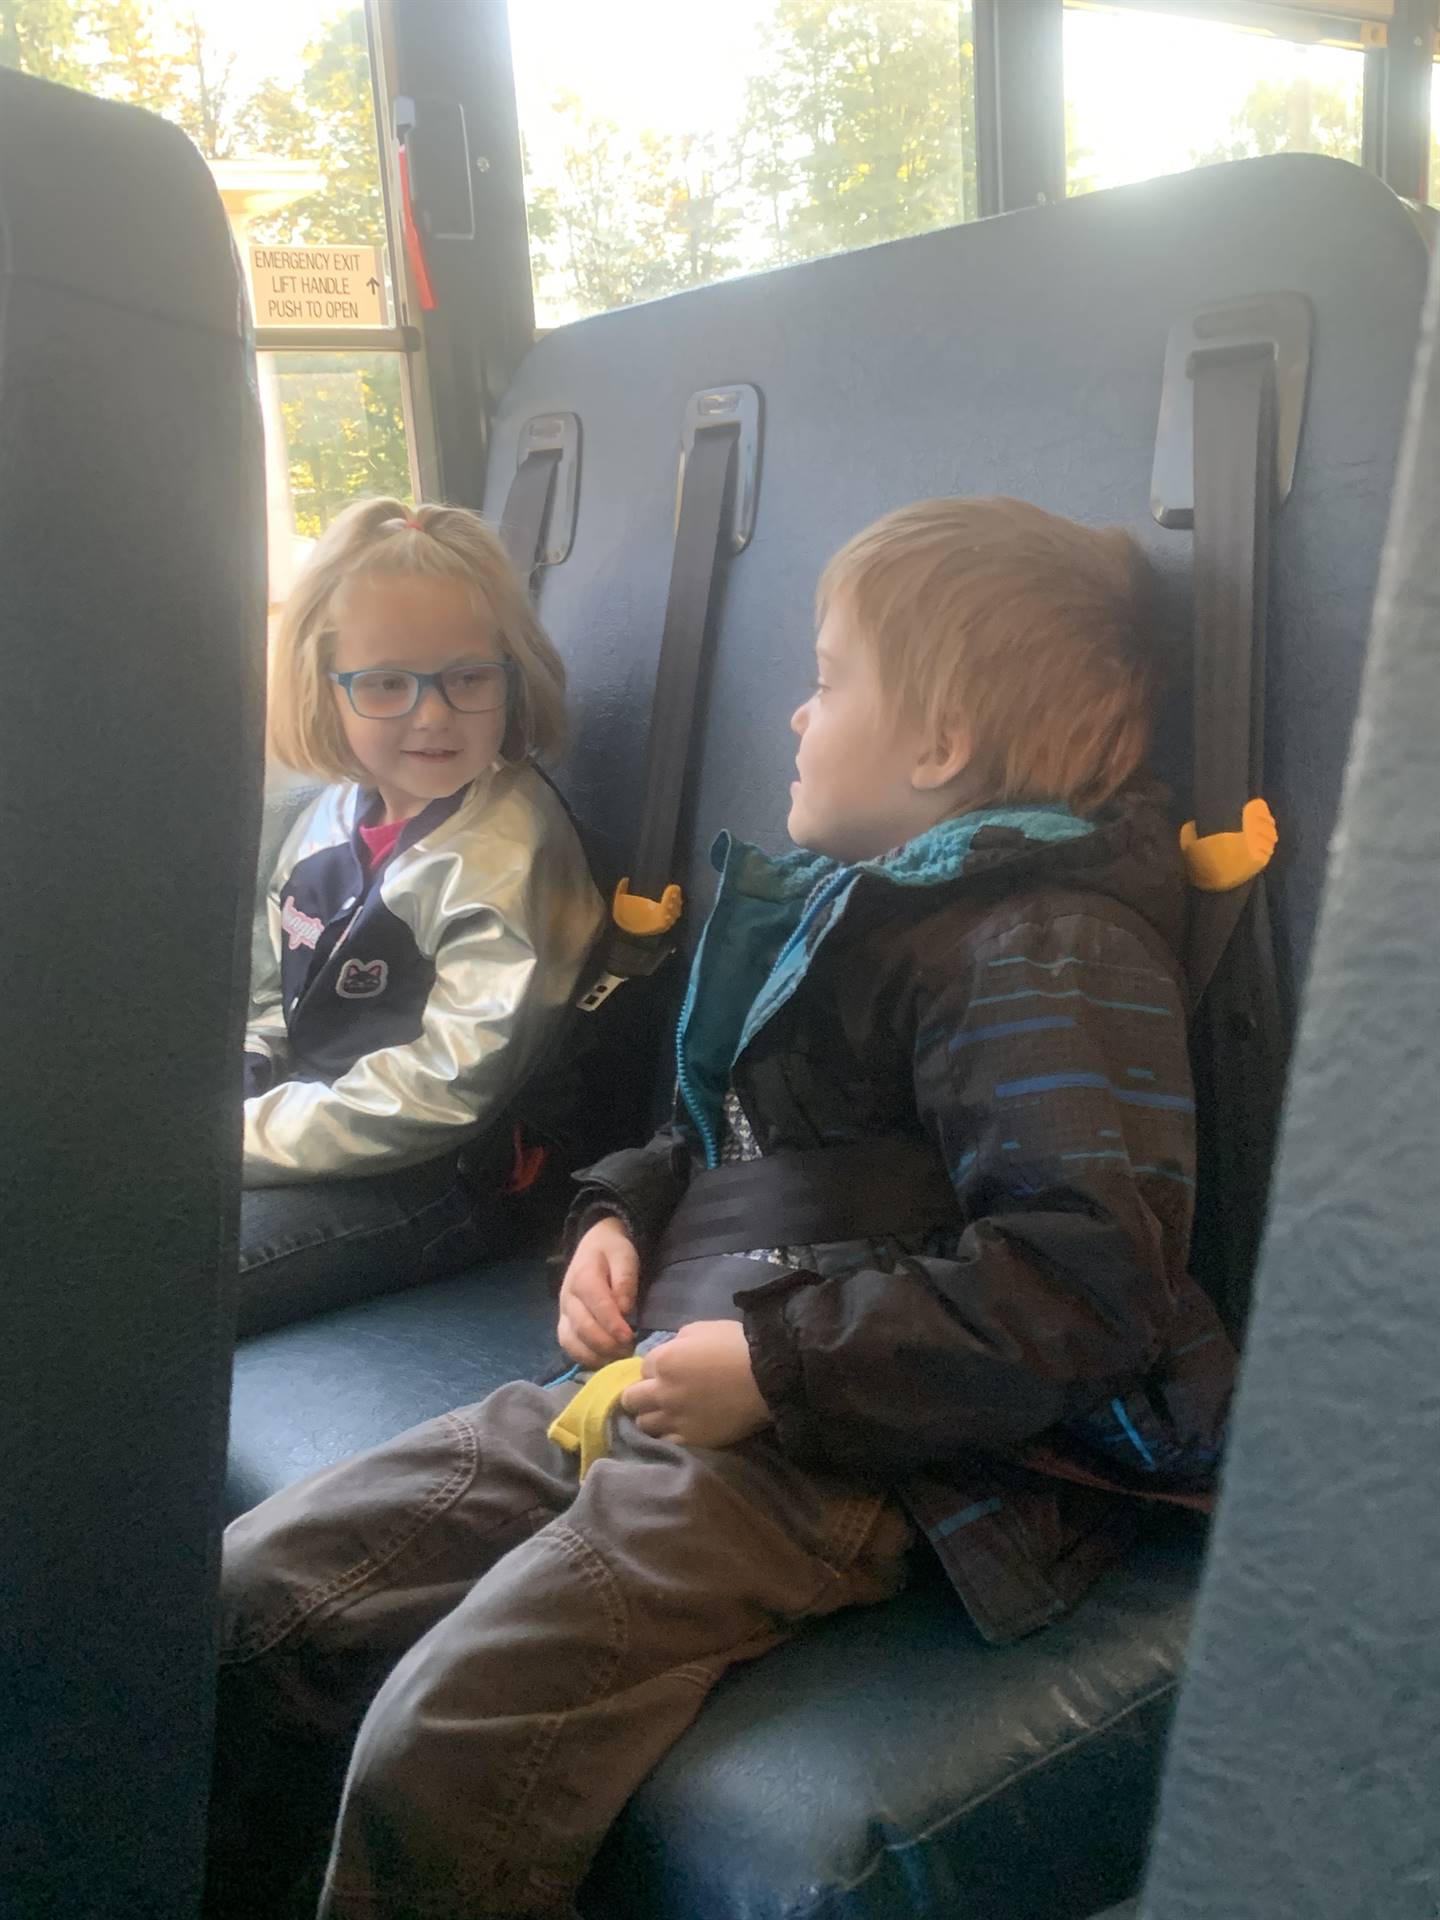 2 kids on a bus